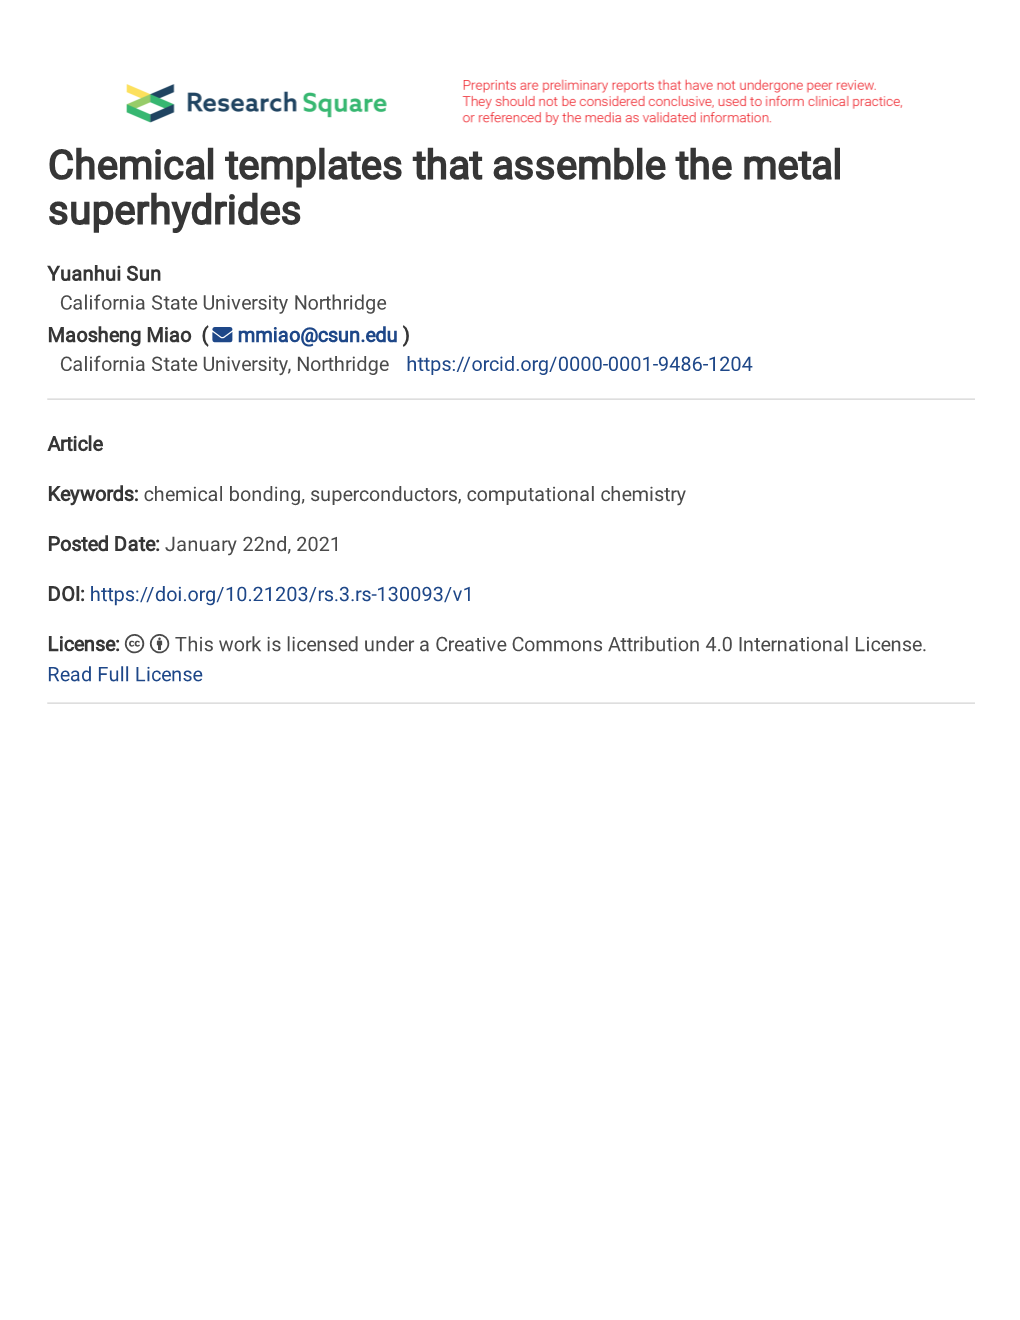 Chemical Templates That Assemble the Metal Superhydrides